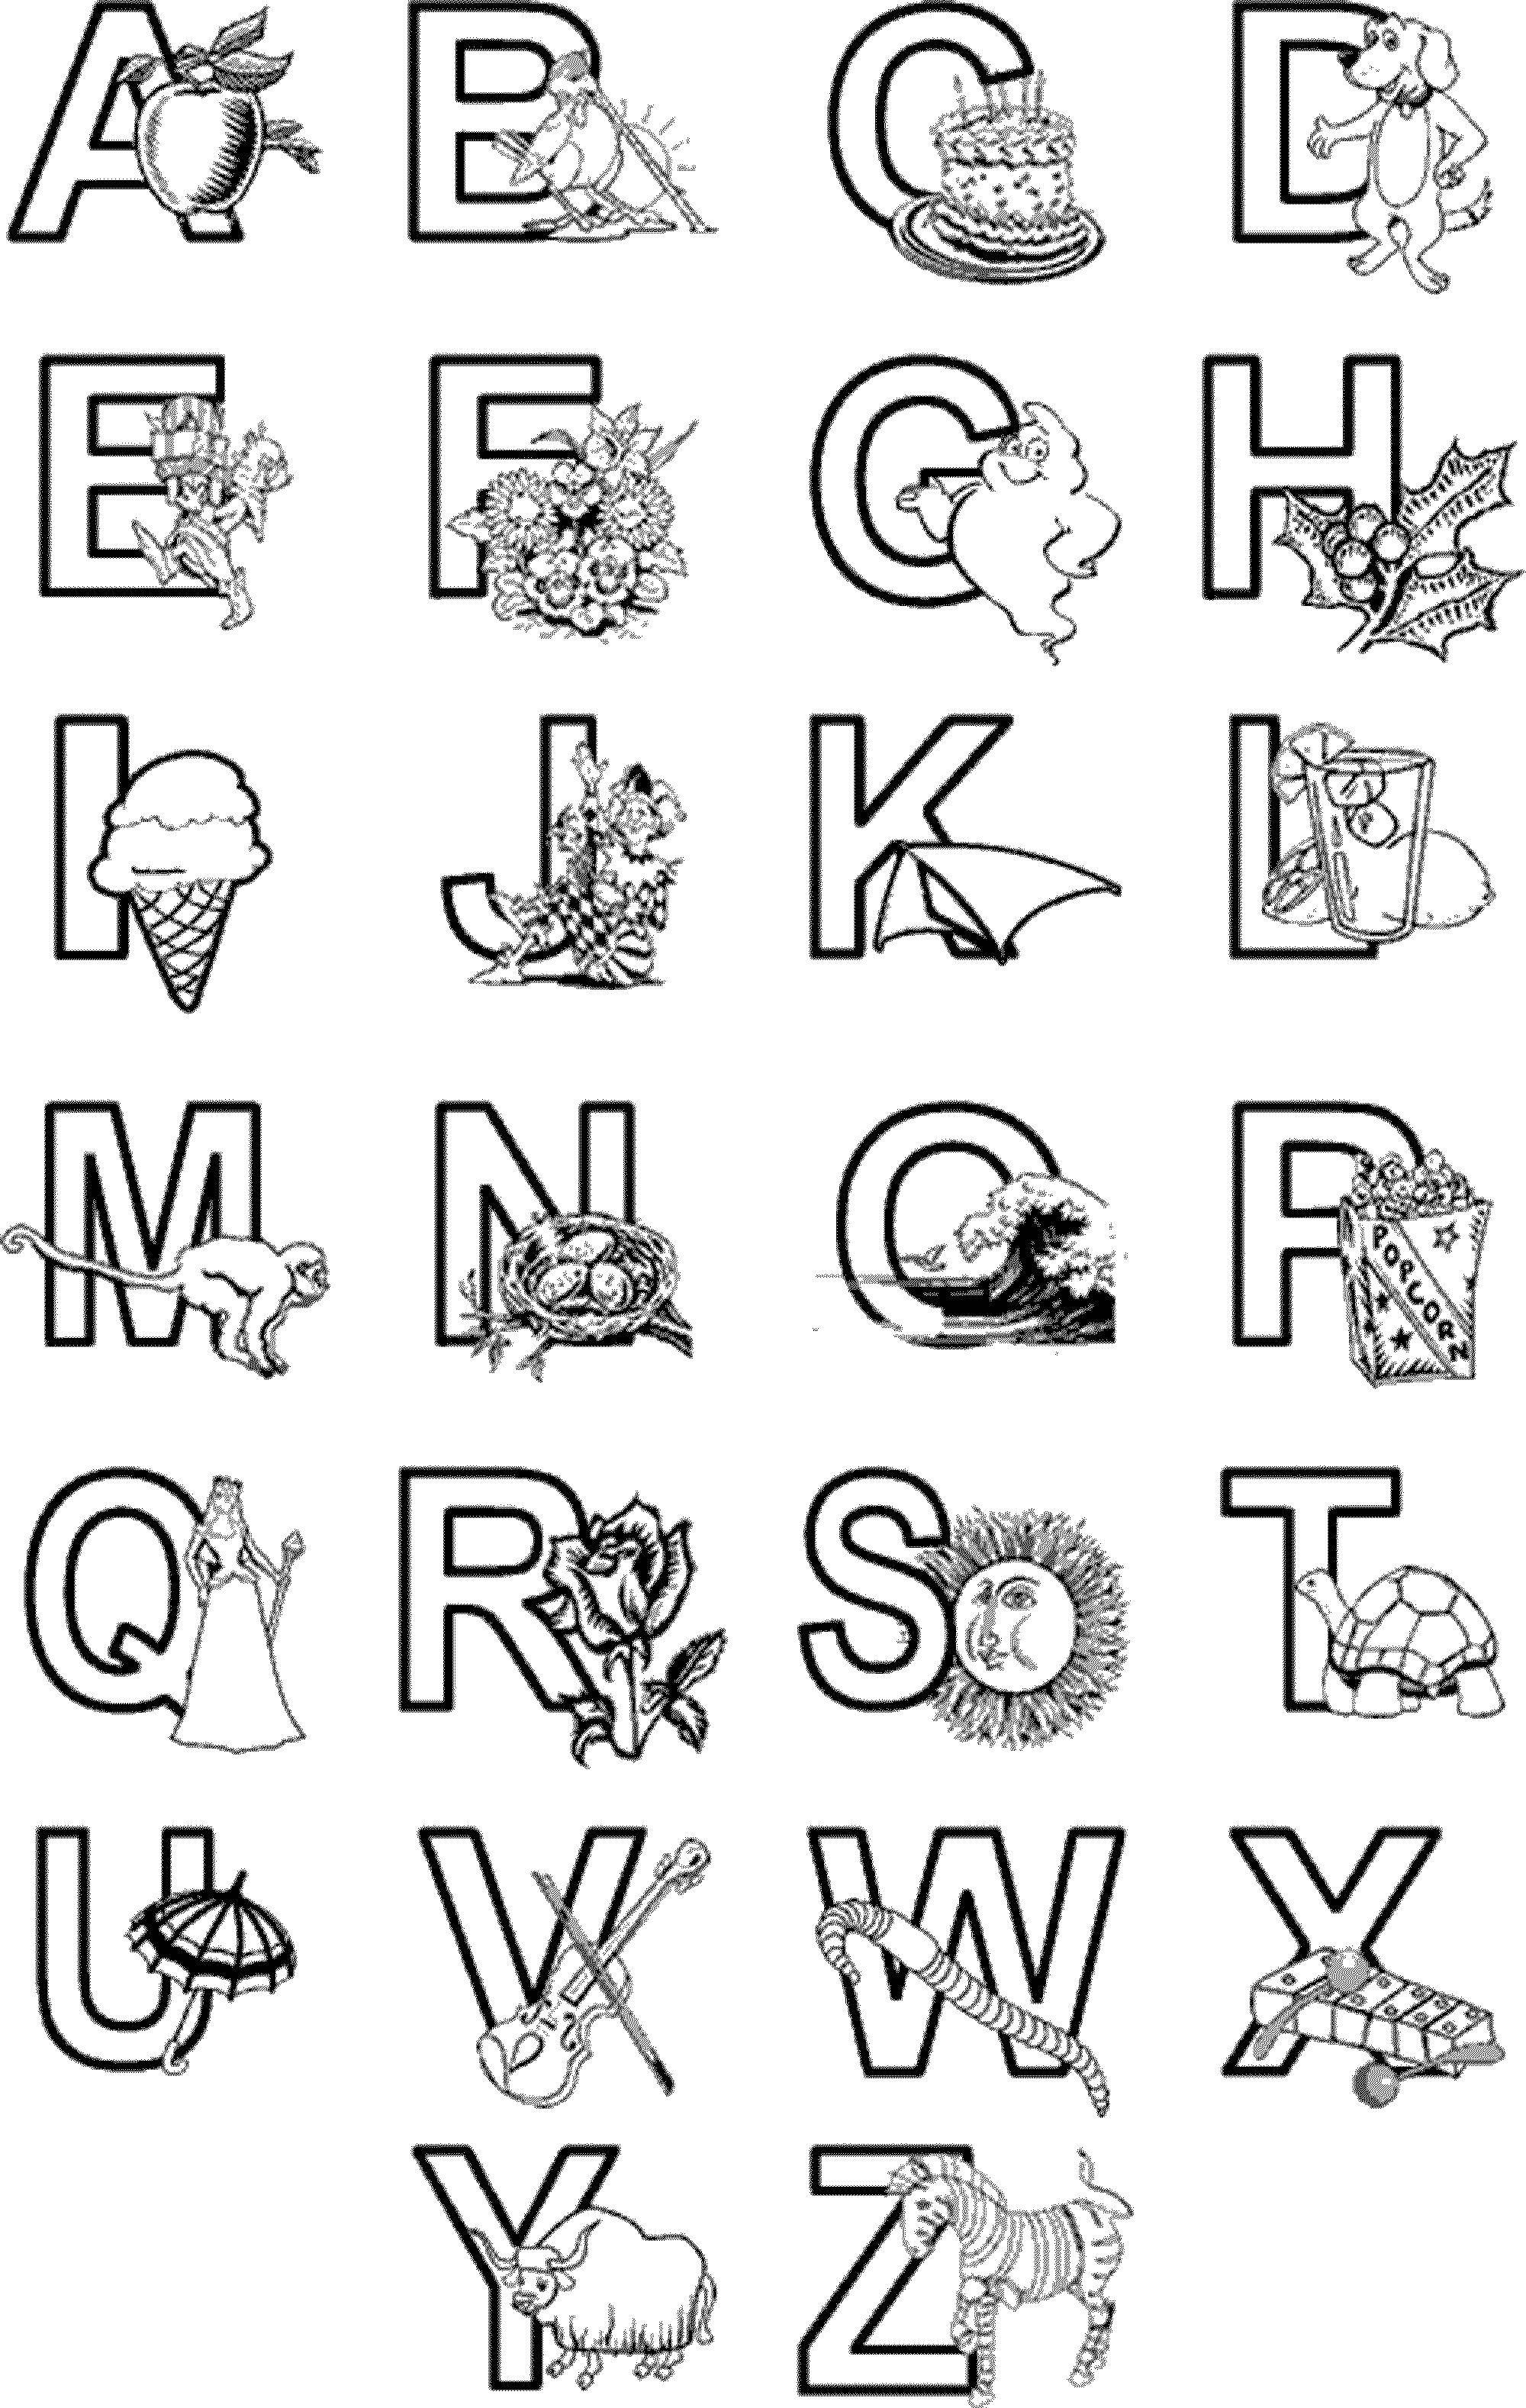 Coloring Alphabet with pictures. Category English alphabet. Tags:  the English alphabet , letters, .